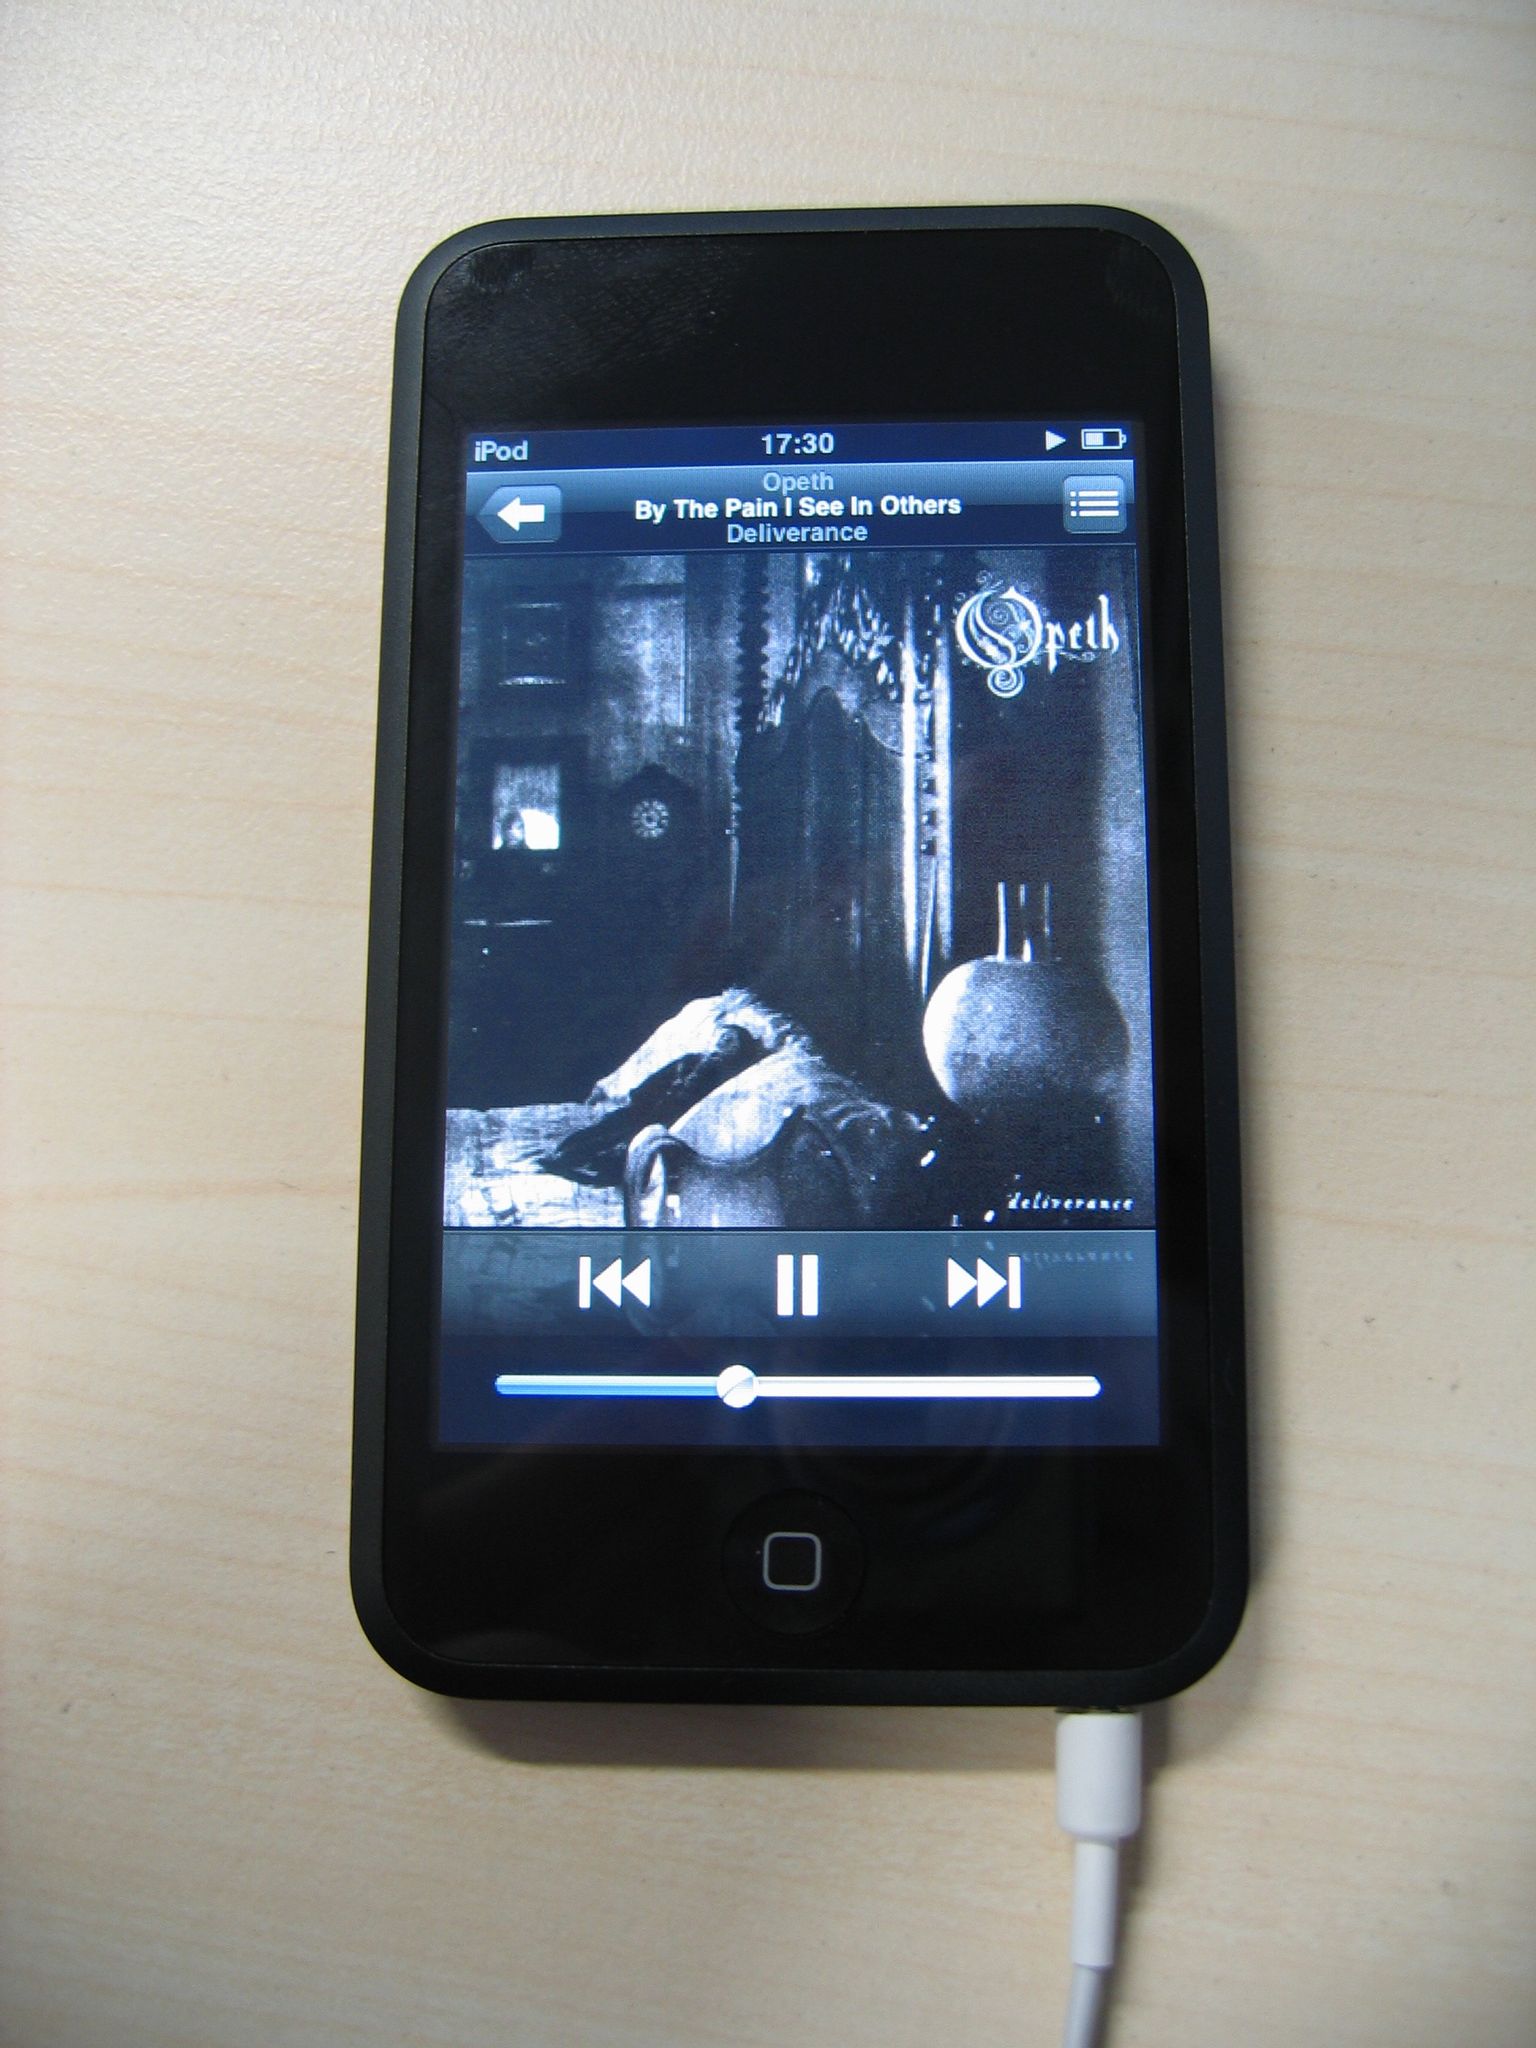 A photo of a black iPod touch with the standard white iPod earbuds plugged in, playing the song "By The Pain I See In Others" by Opeth.